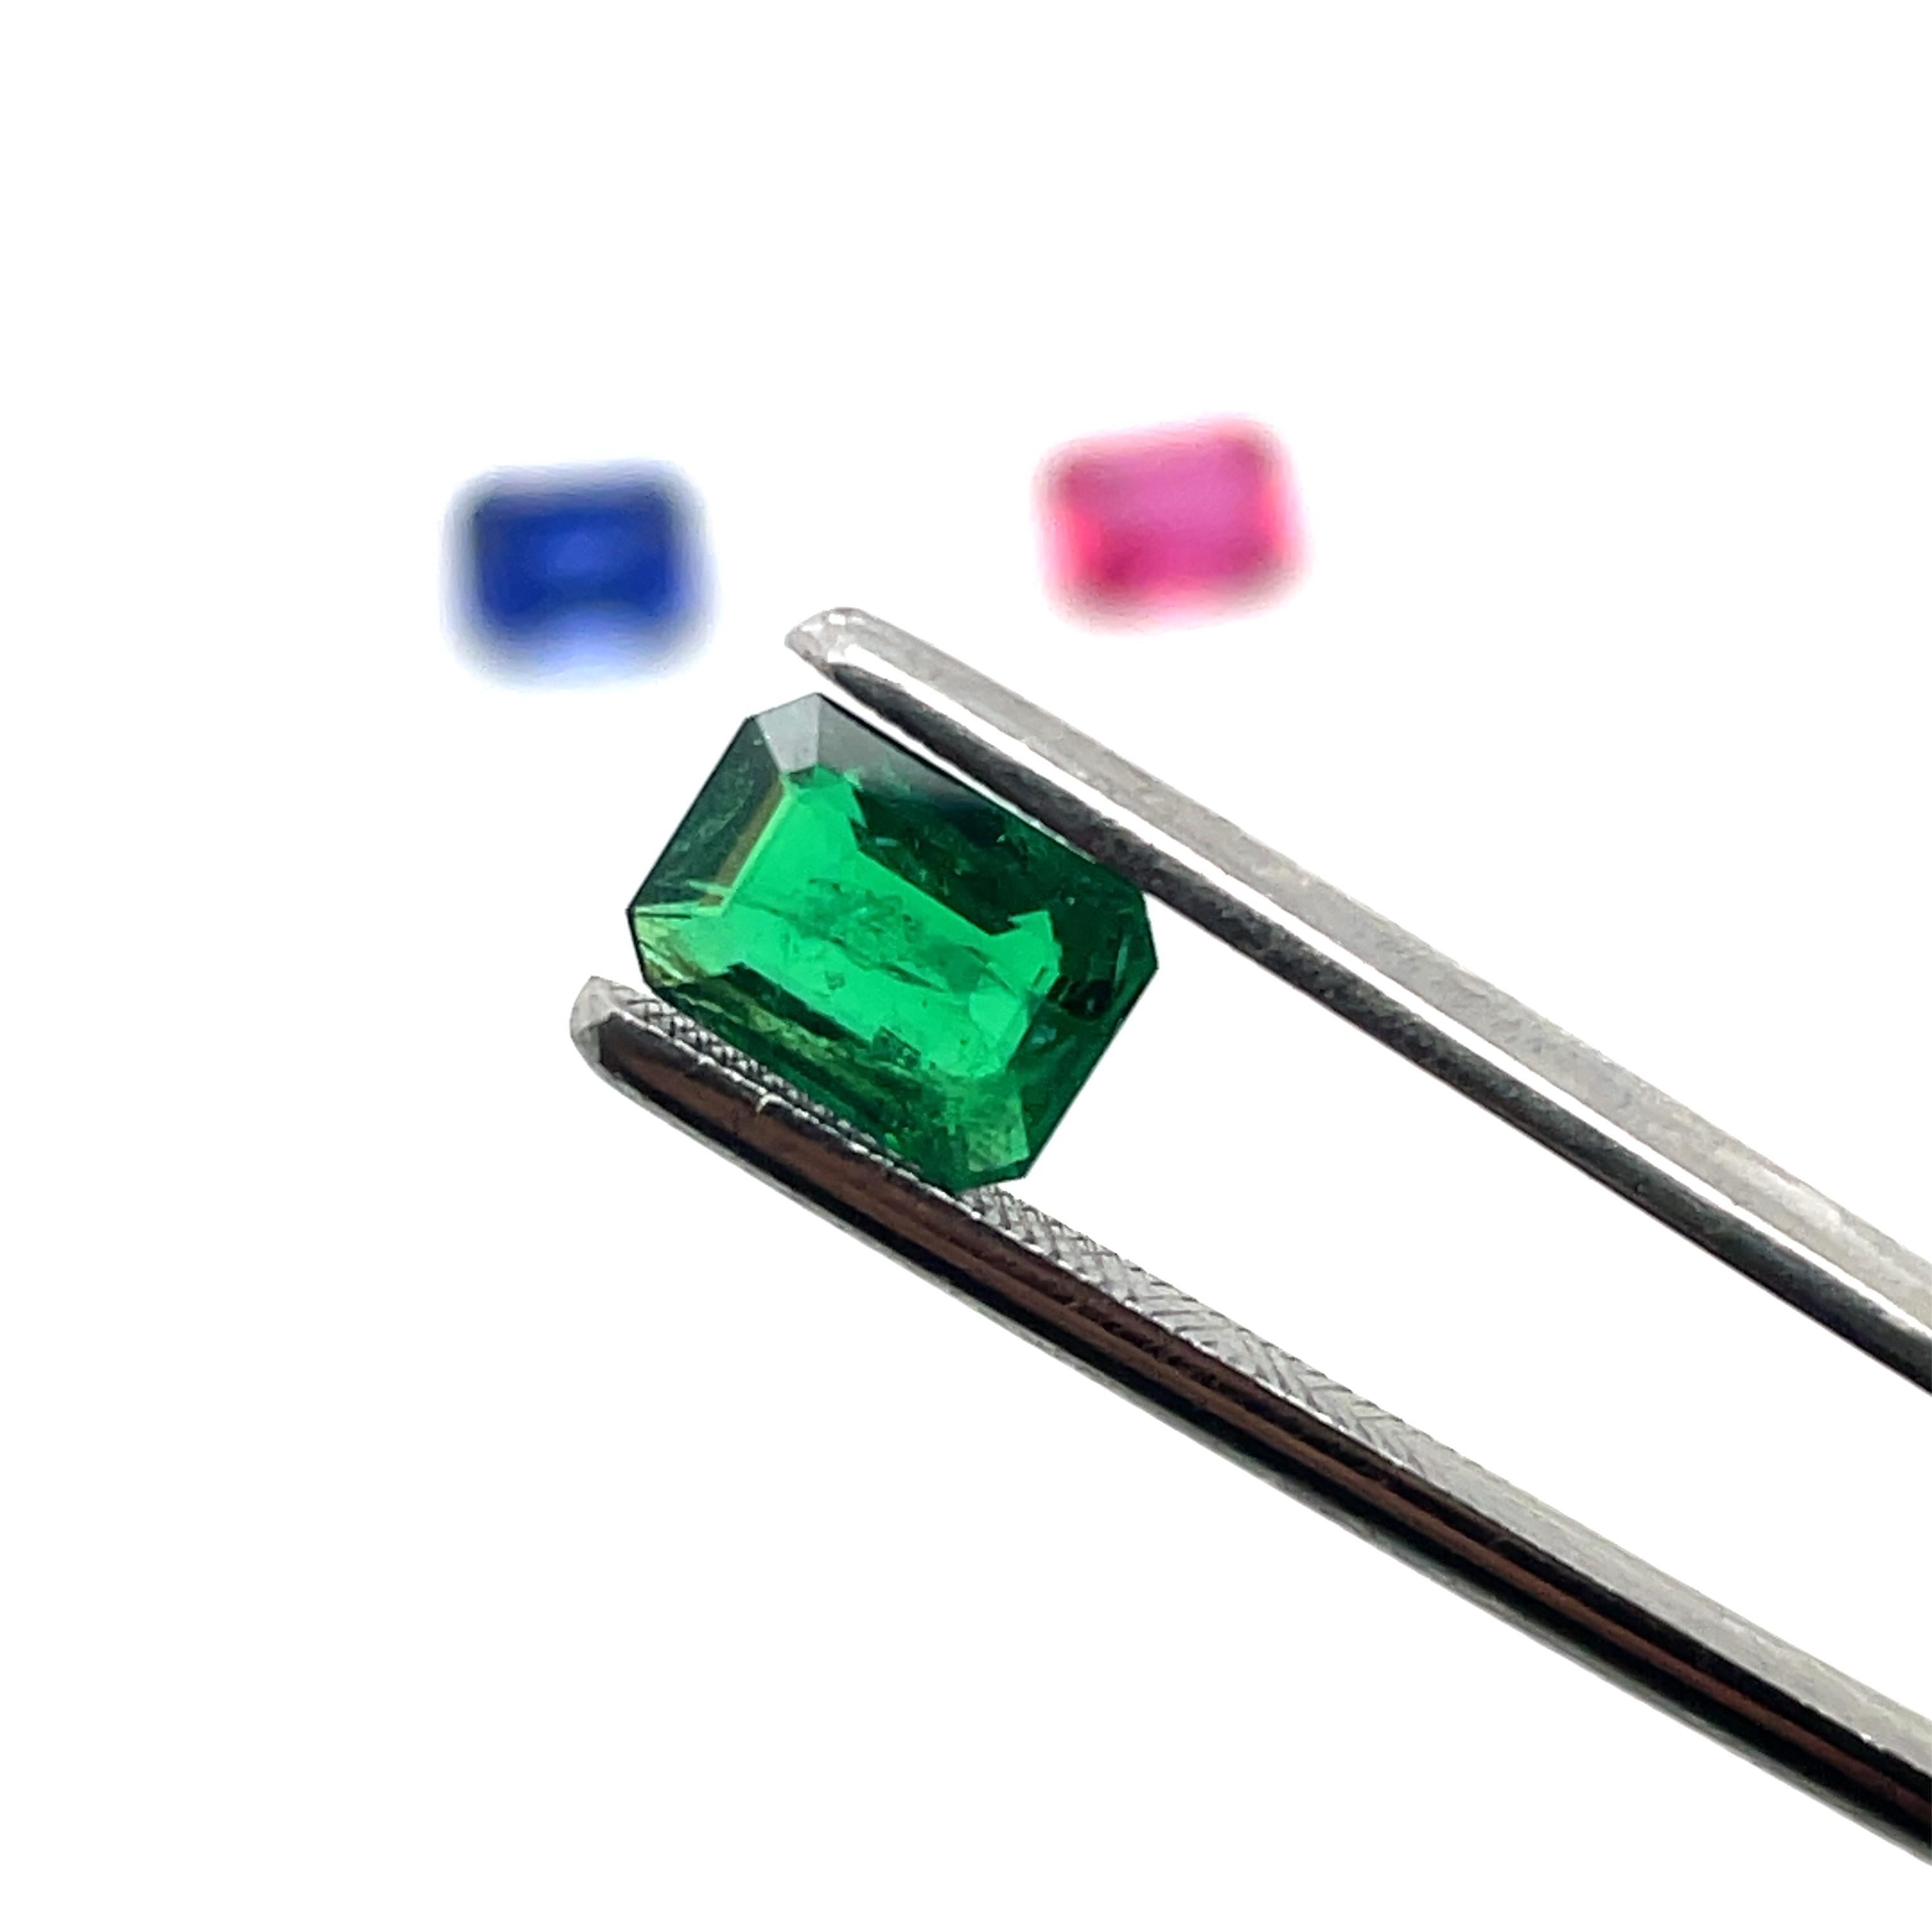 Emerald-Cut Ruby Cts 1.31 and Blue Sapphire Cts 2.16 and Emerald Cts 0.92 Loose  For Sale 4